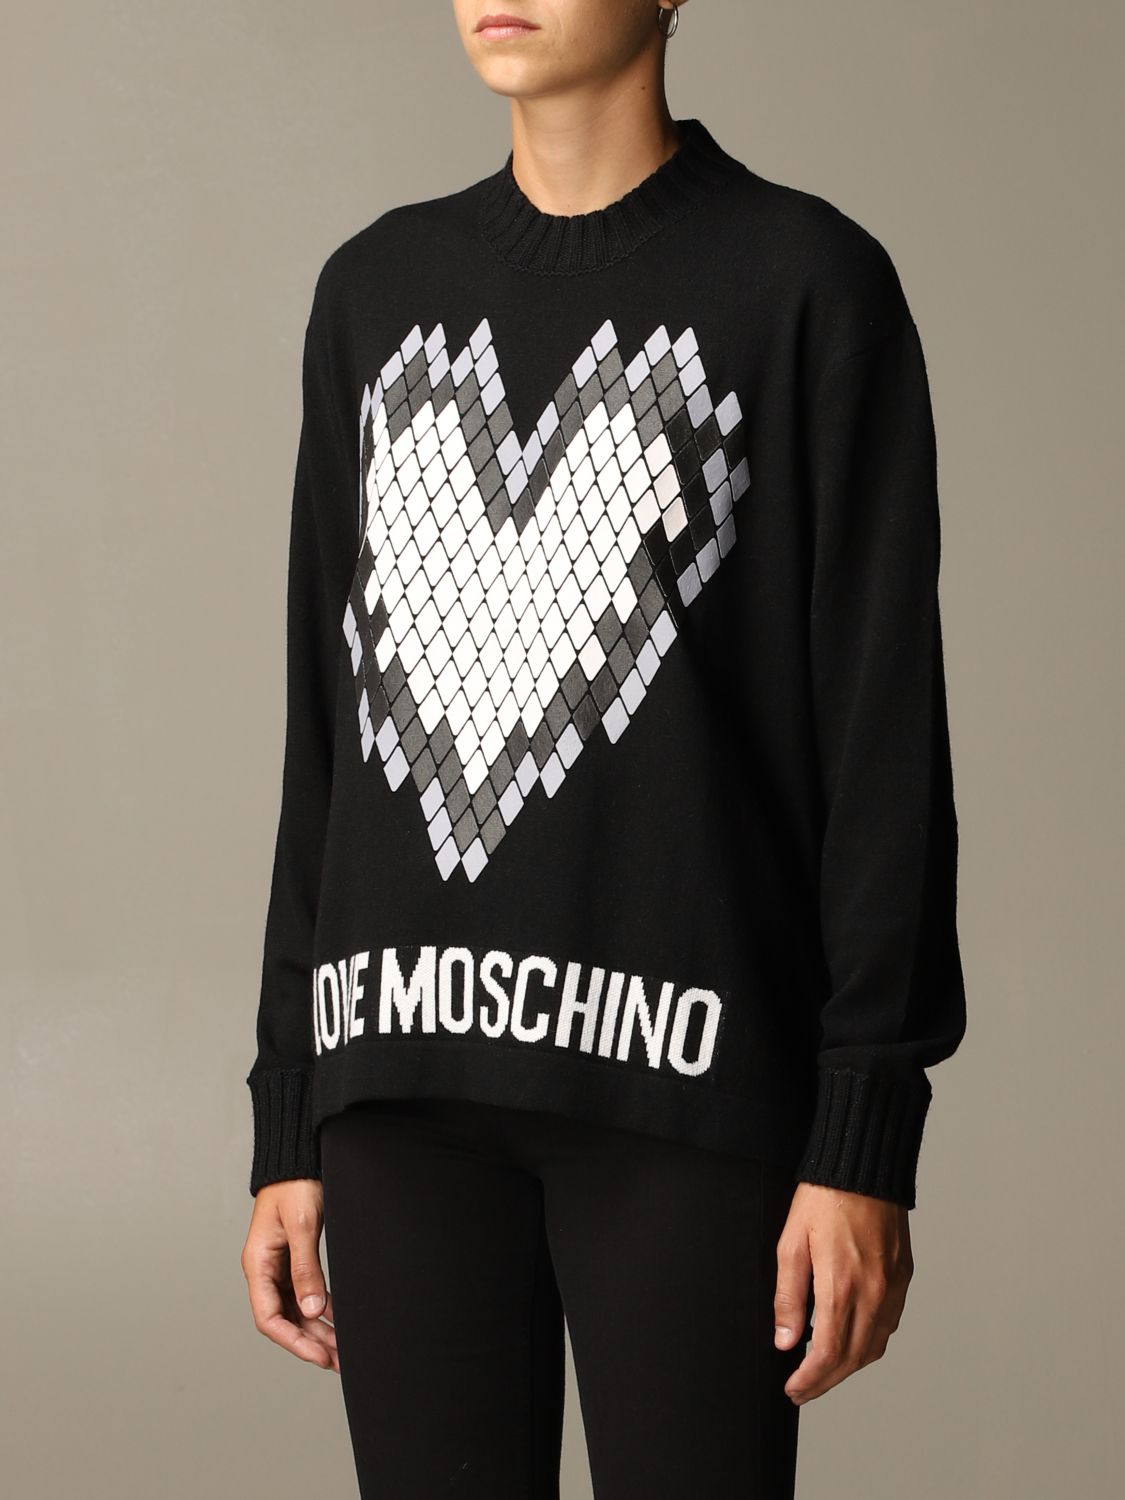 Love Moschino Pullover With Heart Print Sweater Love Moschino Women Black Sweater Love Moschino Ws35g11 X06 Giglio En